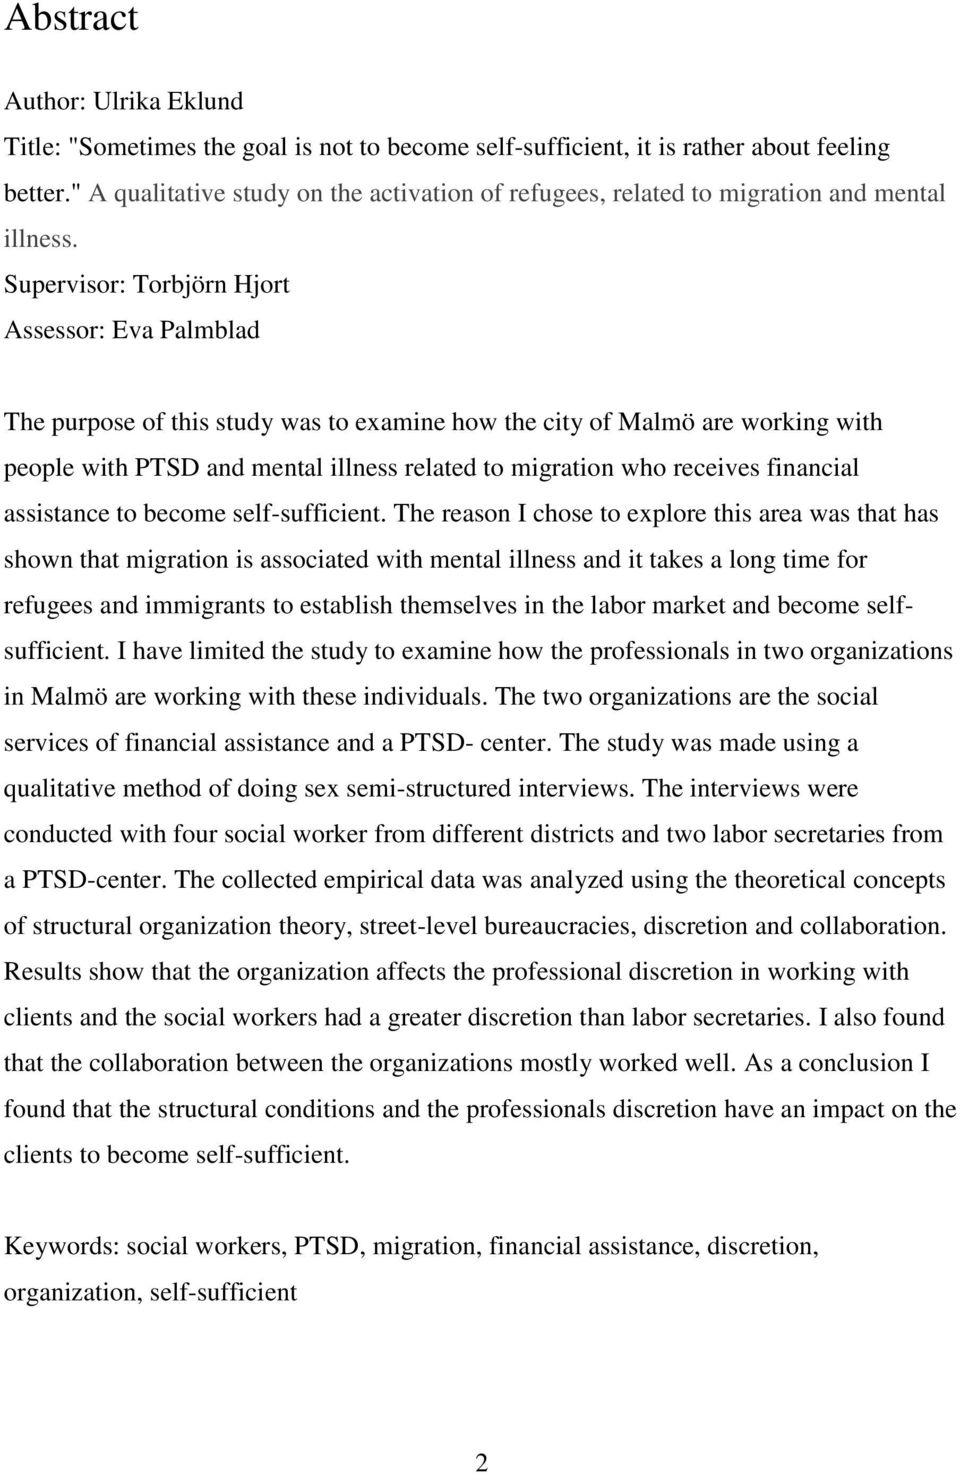 Supervisor: Torbjörn Hjort Assessor: Eva Palmblad The purpose of this study was to examine how the city of Malmö are working with people with PTSD and mental illness related to migration who receives